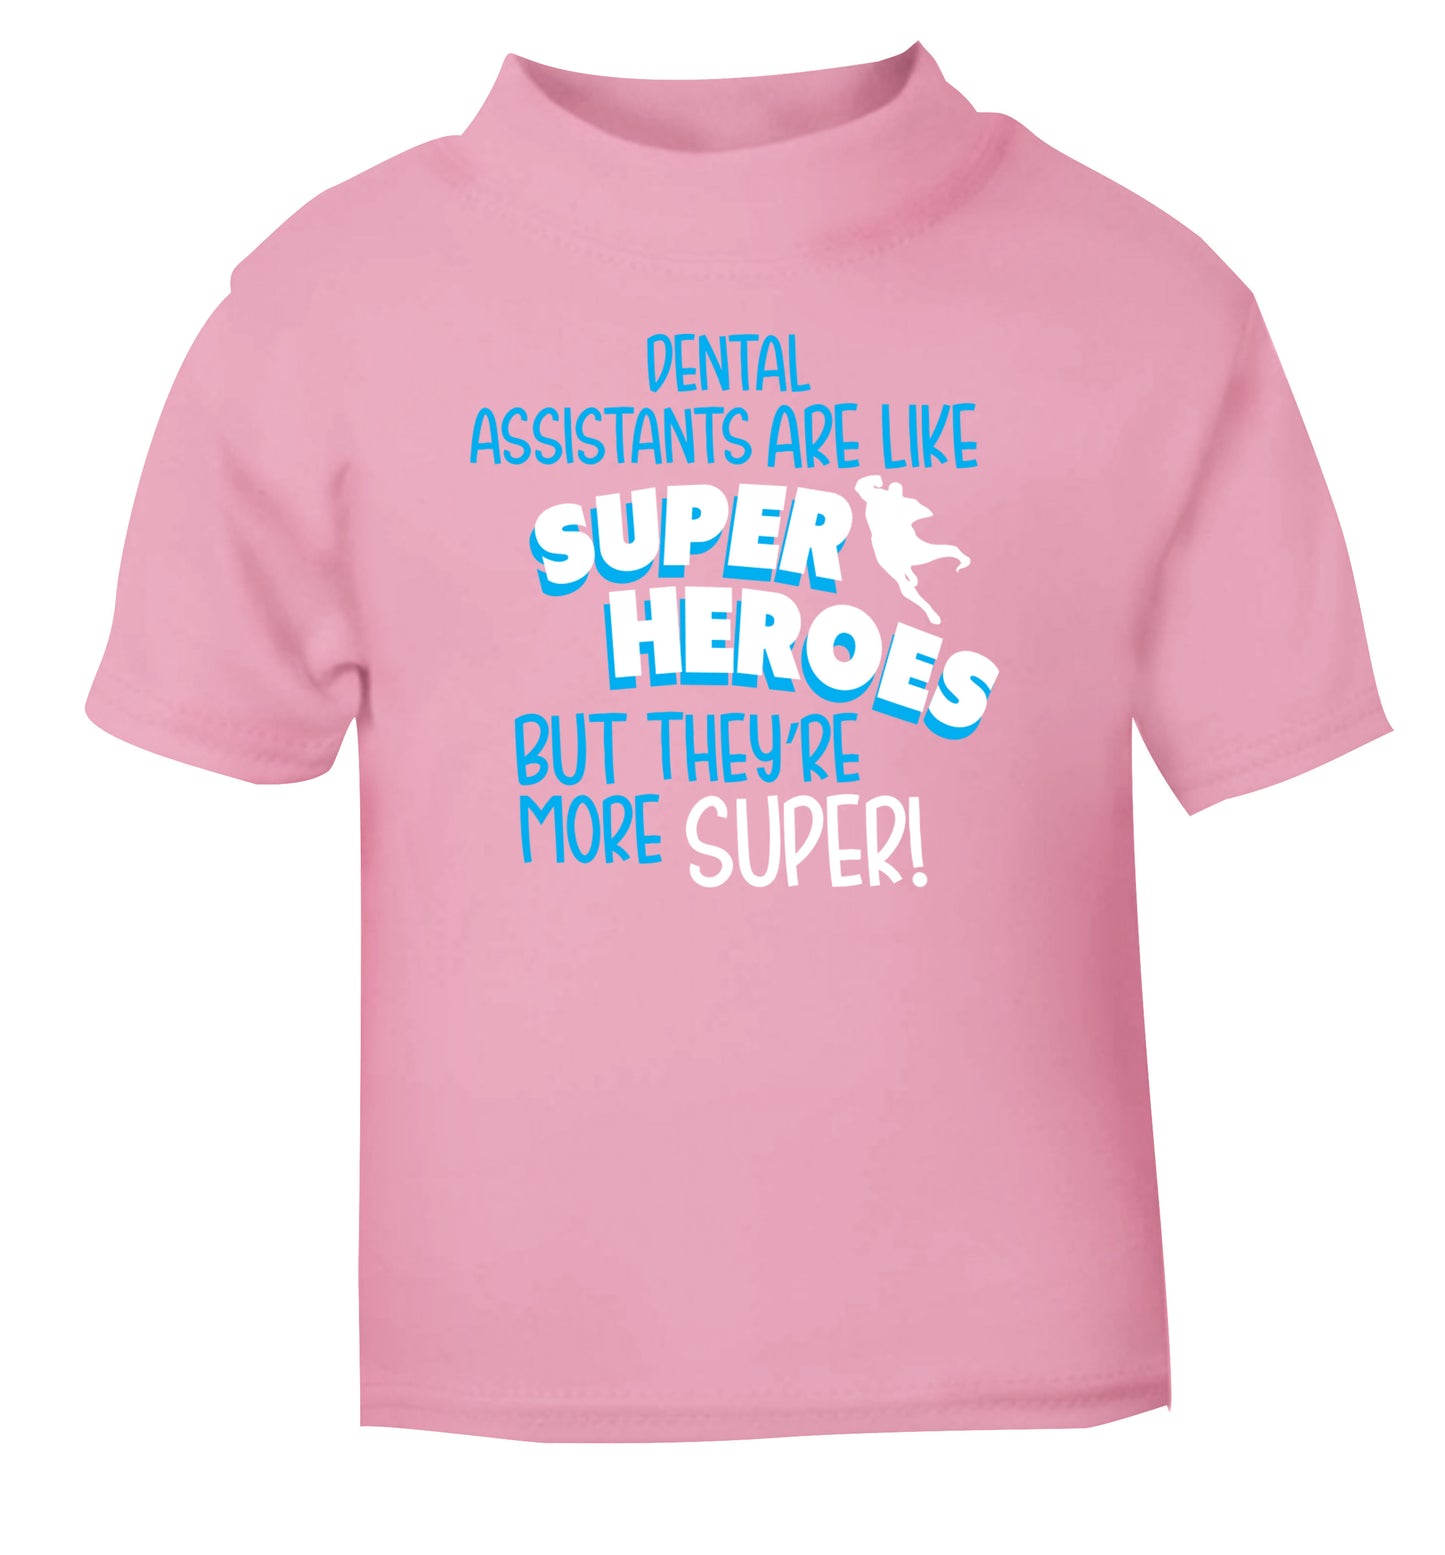 Dental Assistants are like superheros but they're more super light pink Baby Toddler Tshirt 2 Years